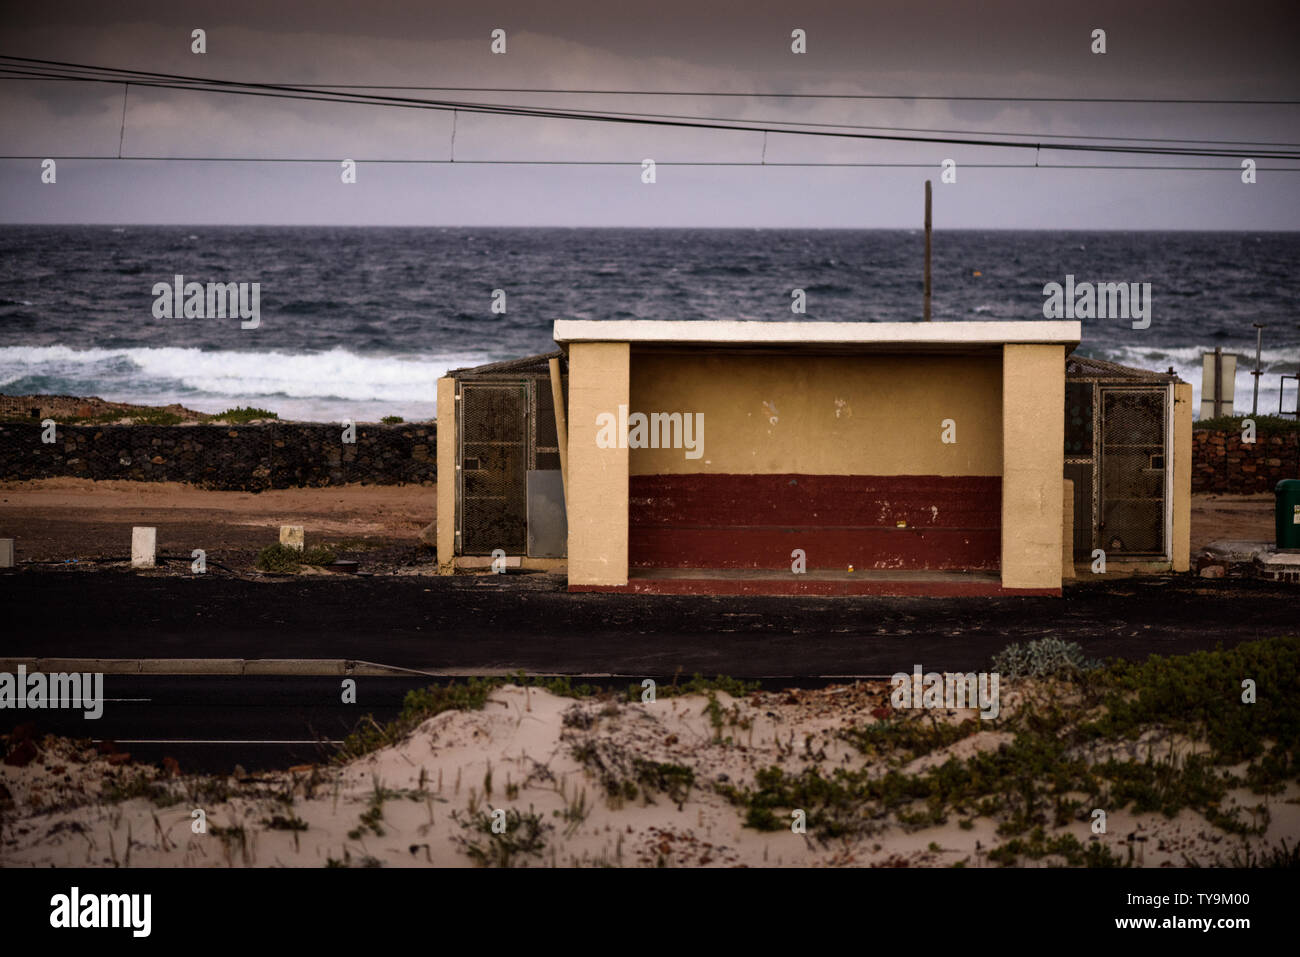 A bus shelter for the Cape Peninsula village of Glencairn, near Cape Town, on South Africa's False Bay coastline Stock Photo